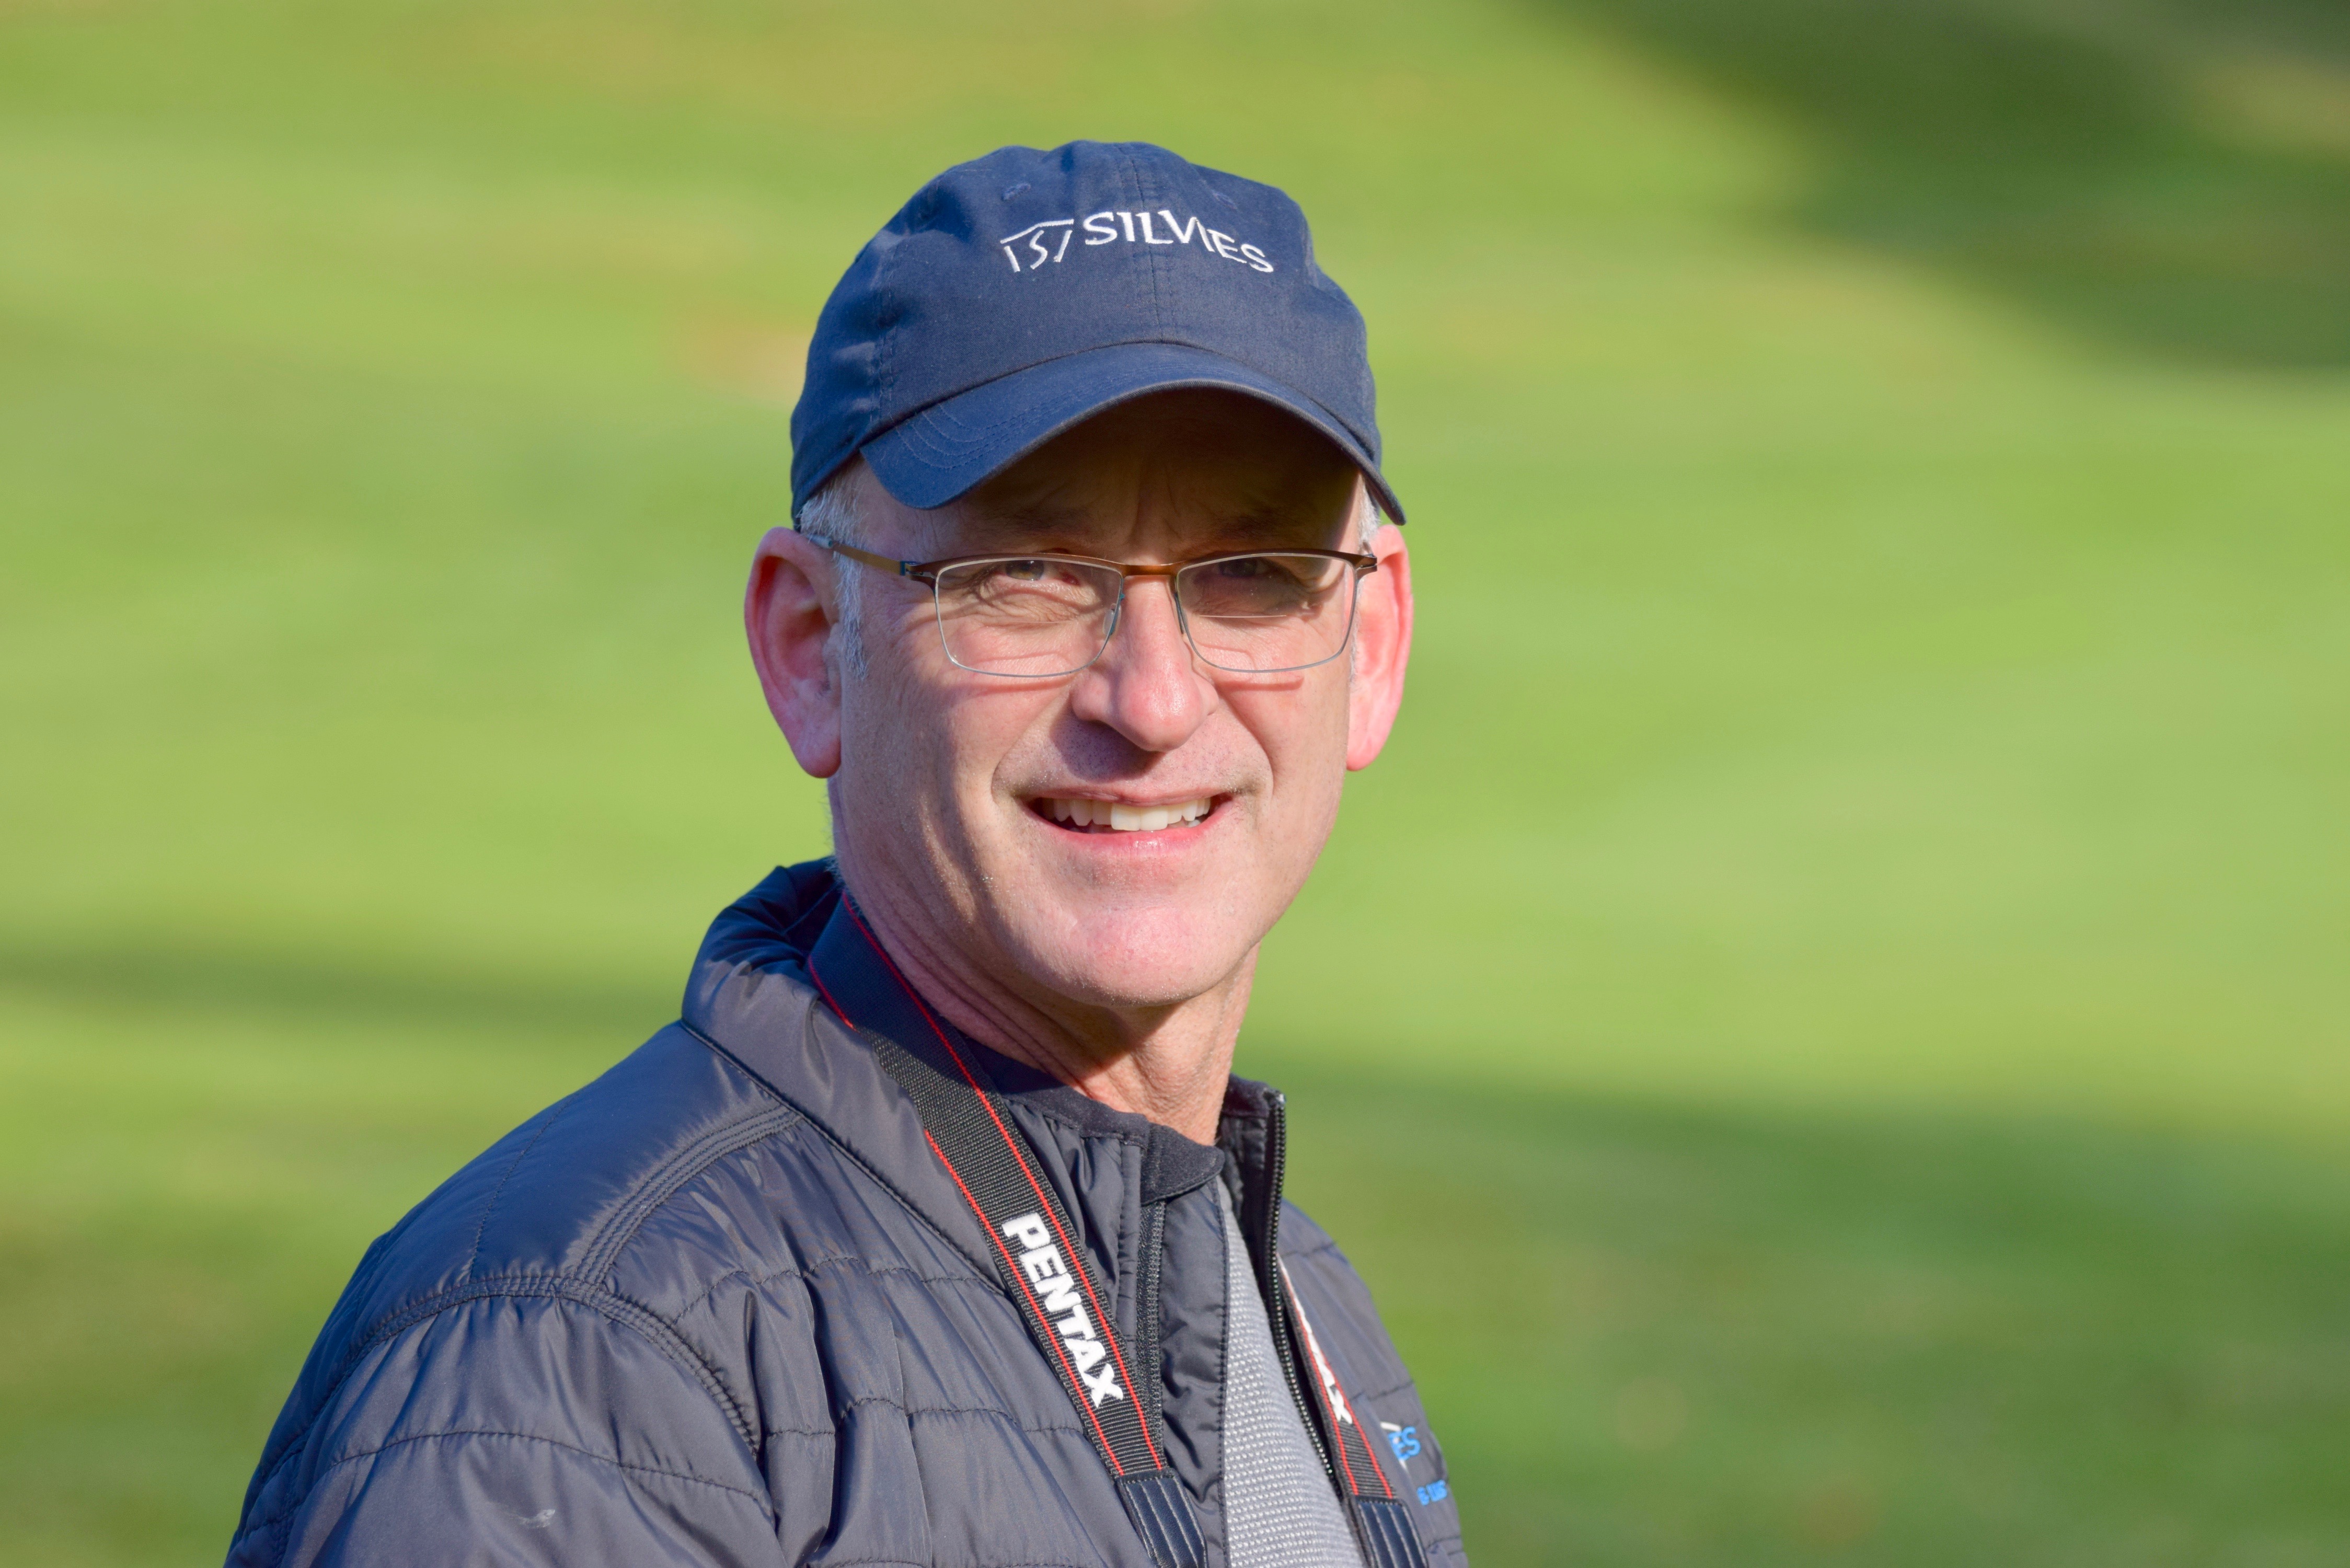 Dan Hixson: Designing golf courses, one hole at a time